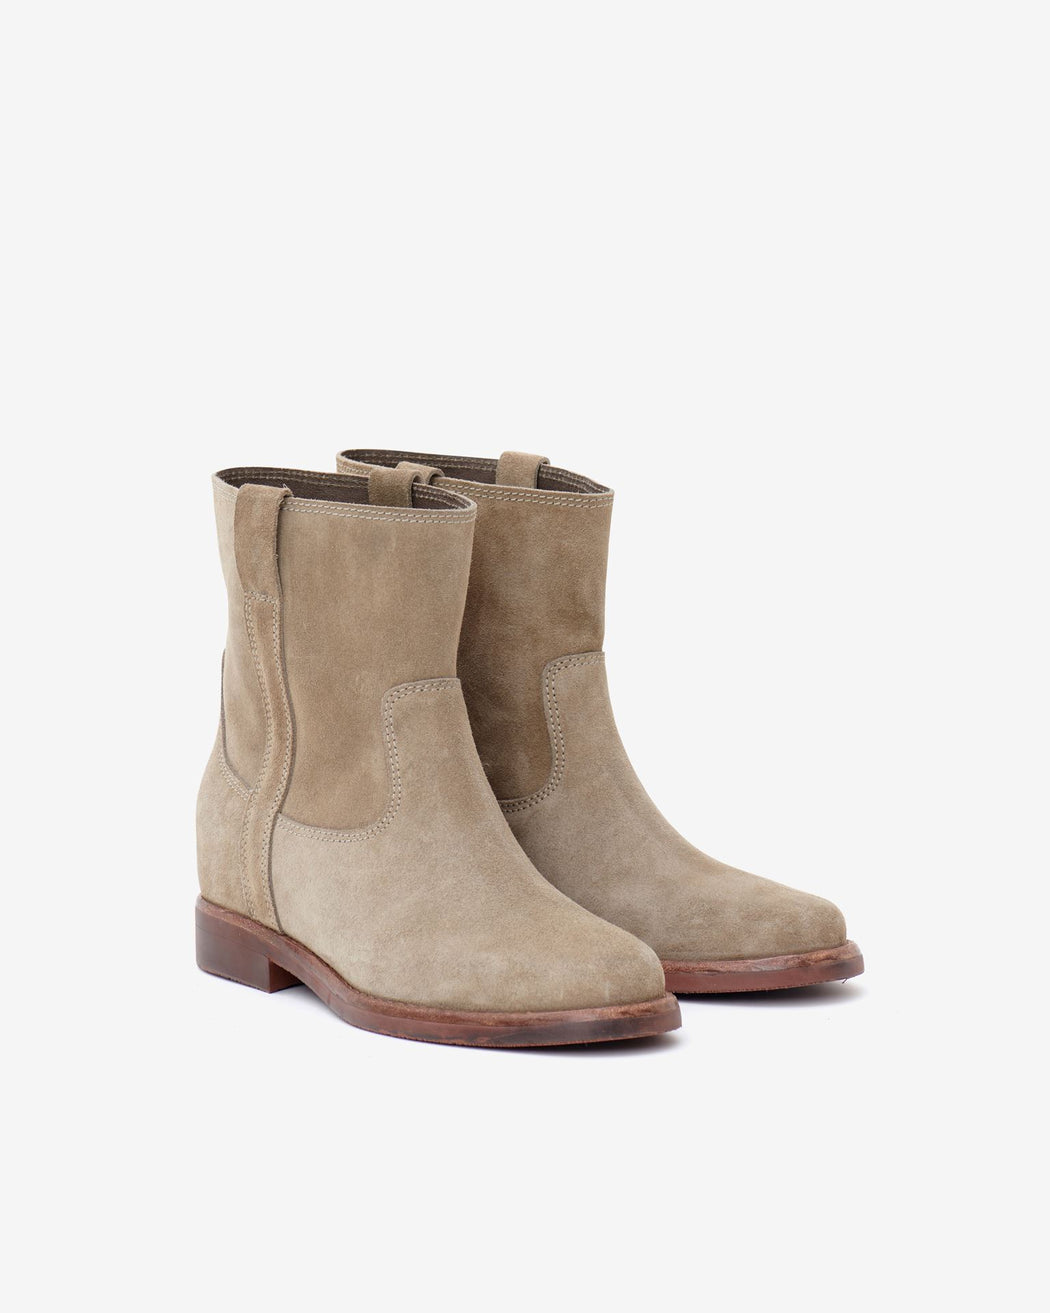 Isabel Marant - Susee Boot in Taupe